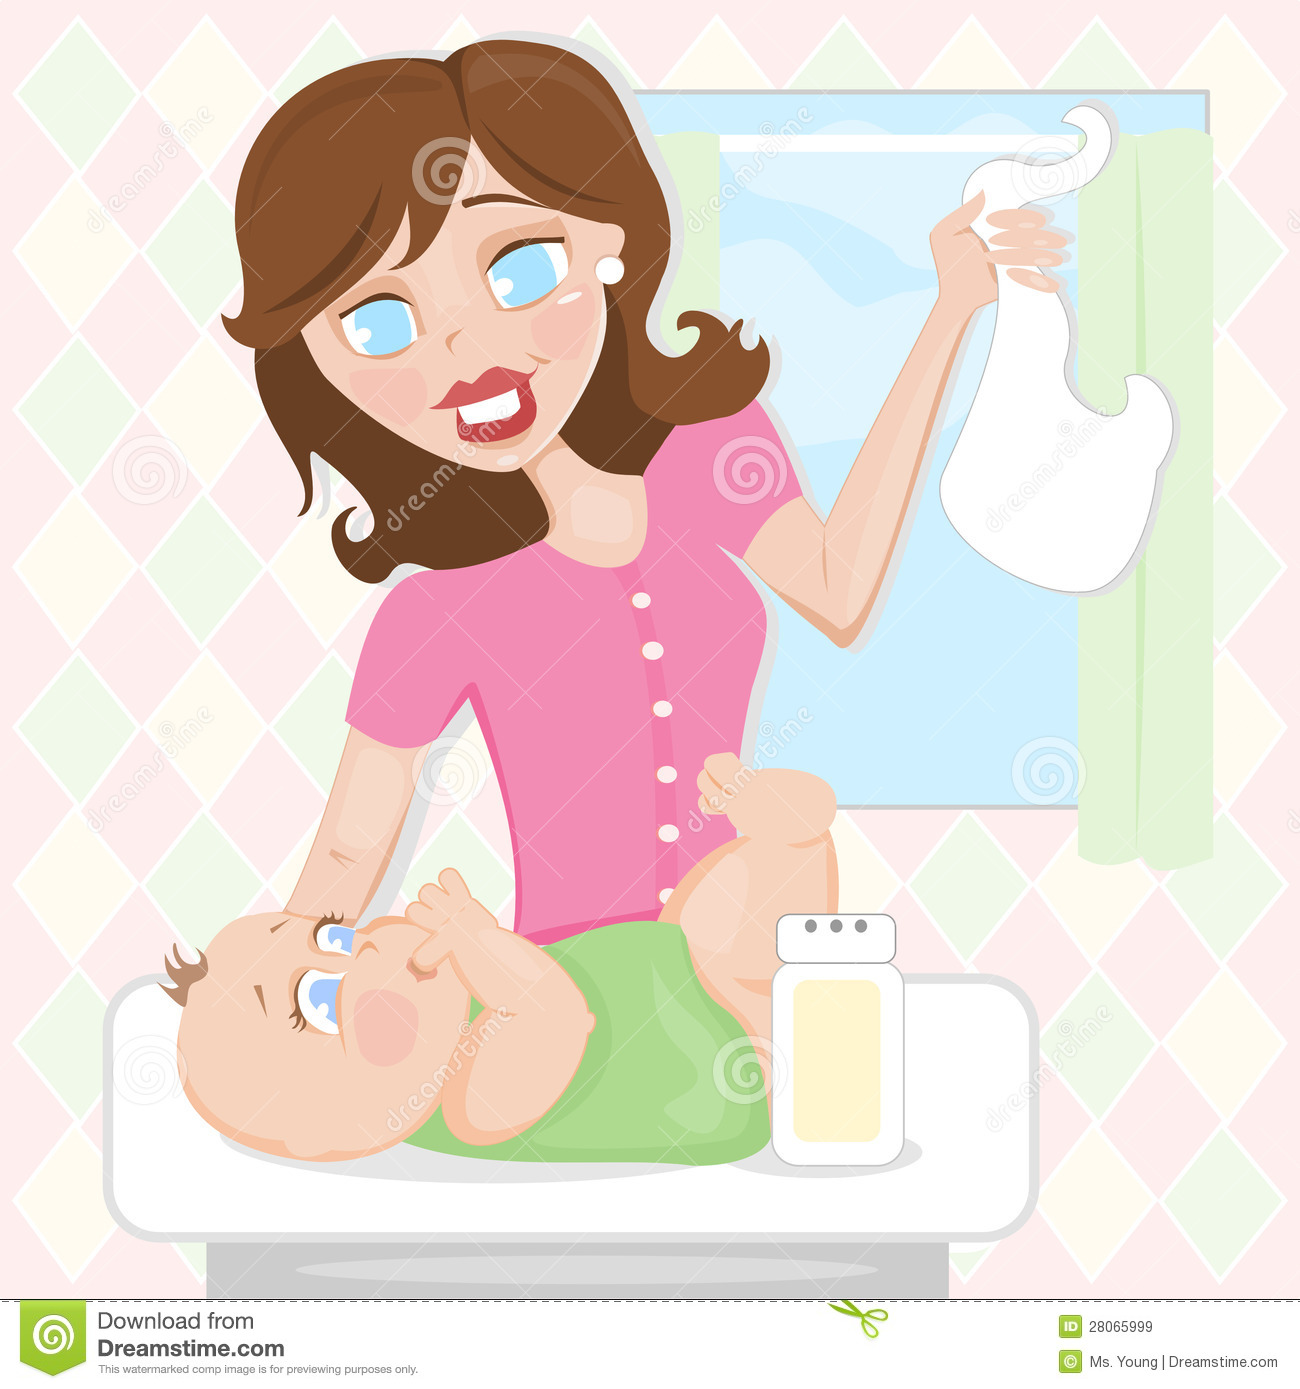 Diaper Change Royalty Free Stock Images   Image  28065999